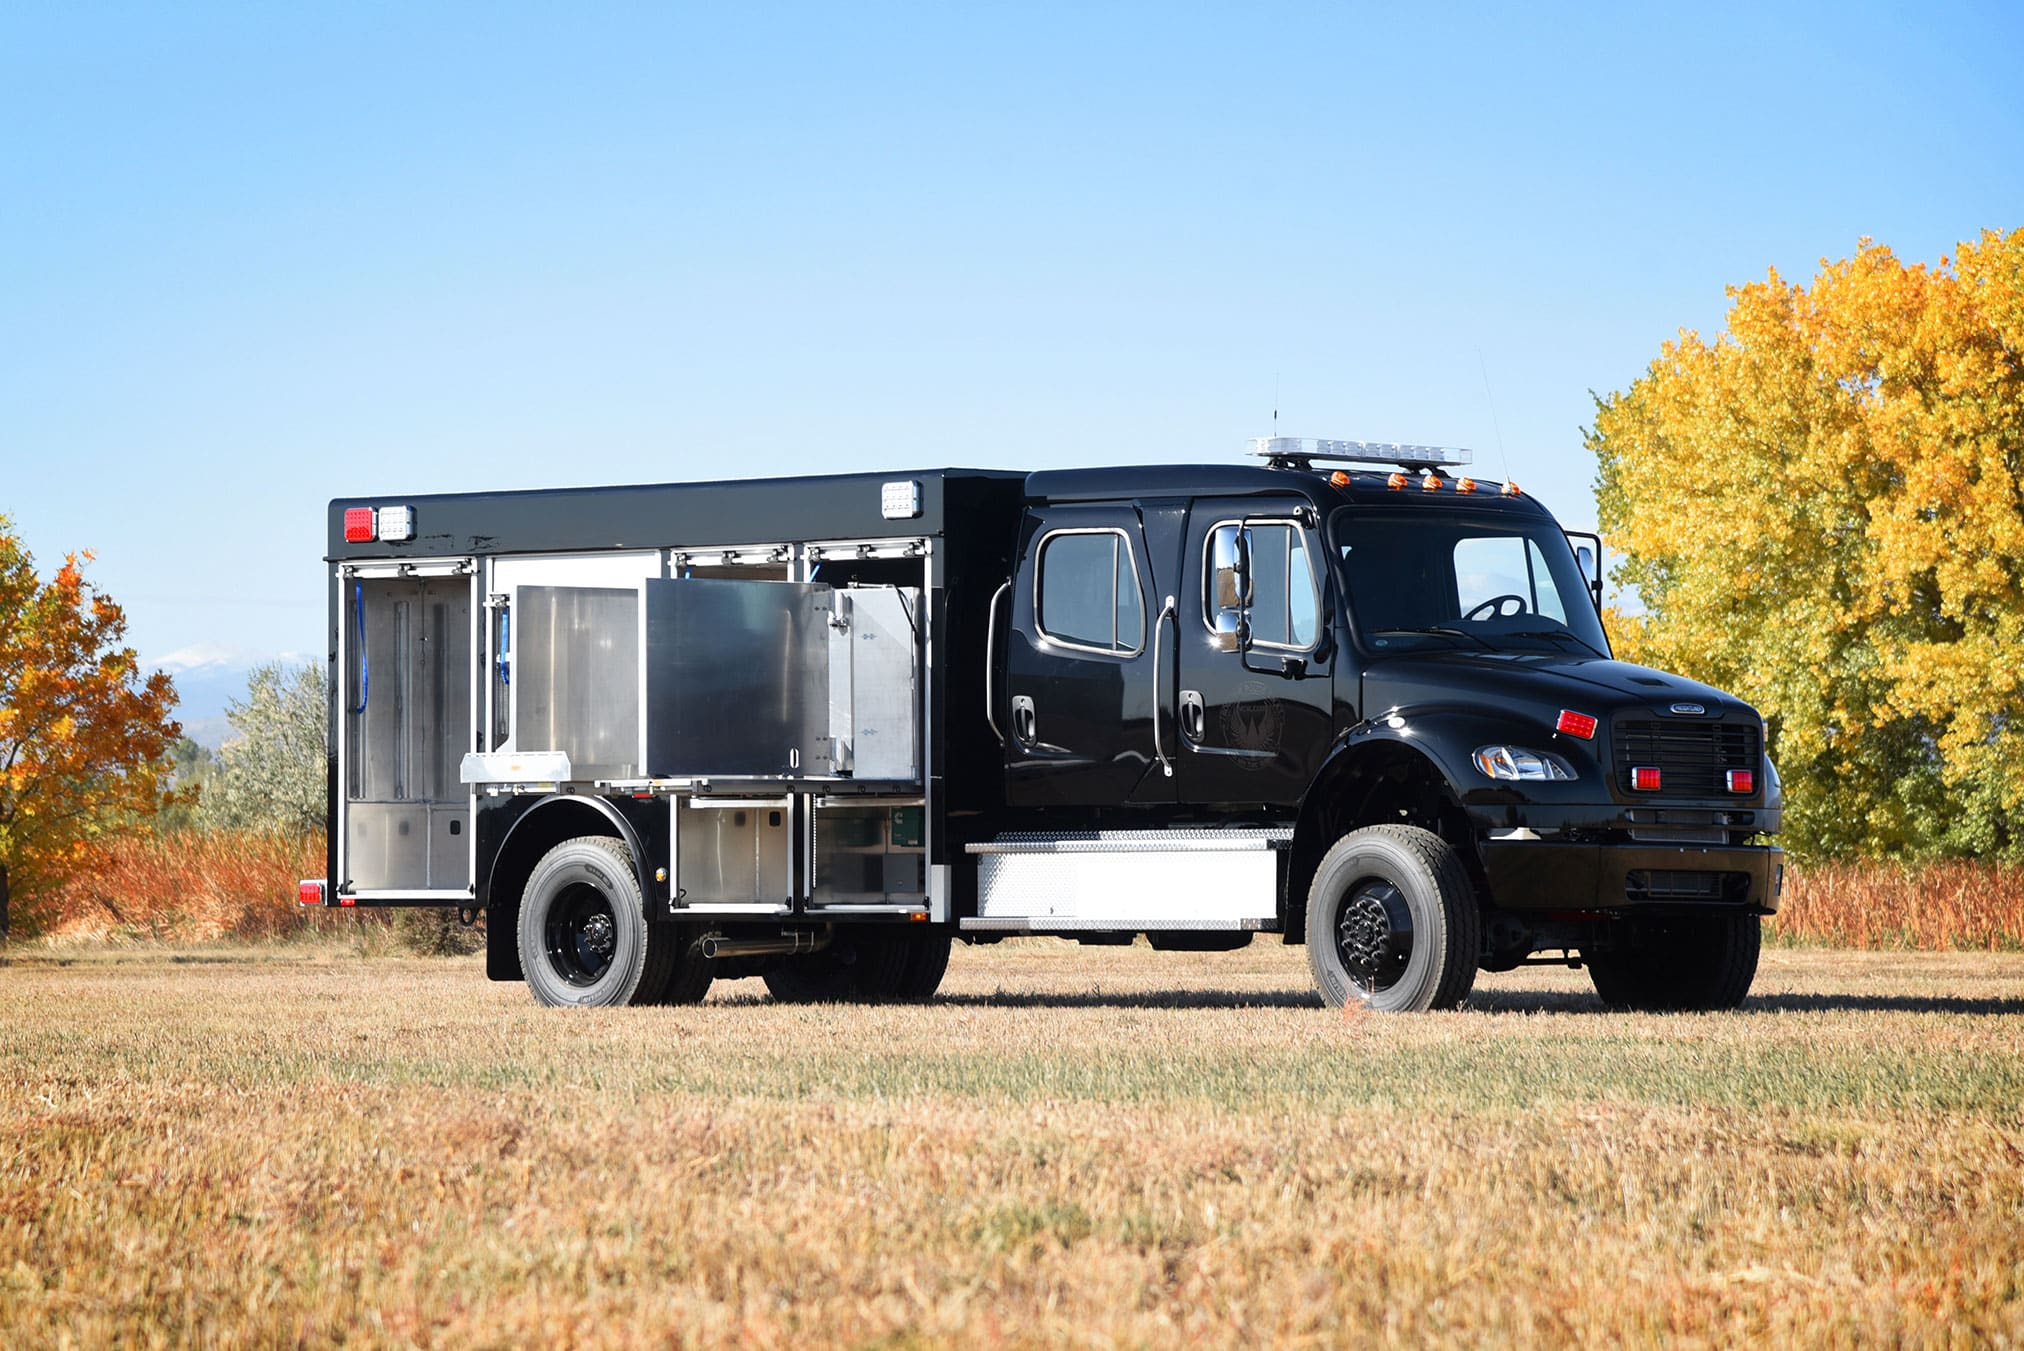 Featured image for “Boulder, CO PD Medium-Duty Incident Vehicle #1130”